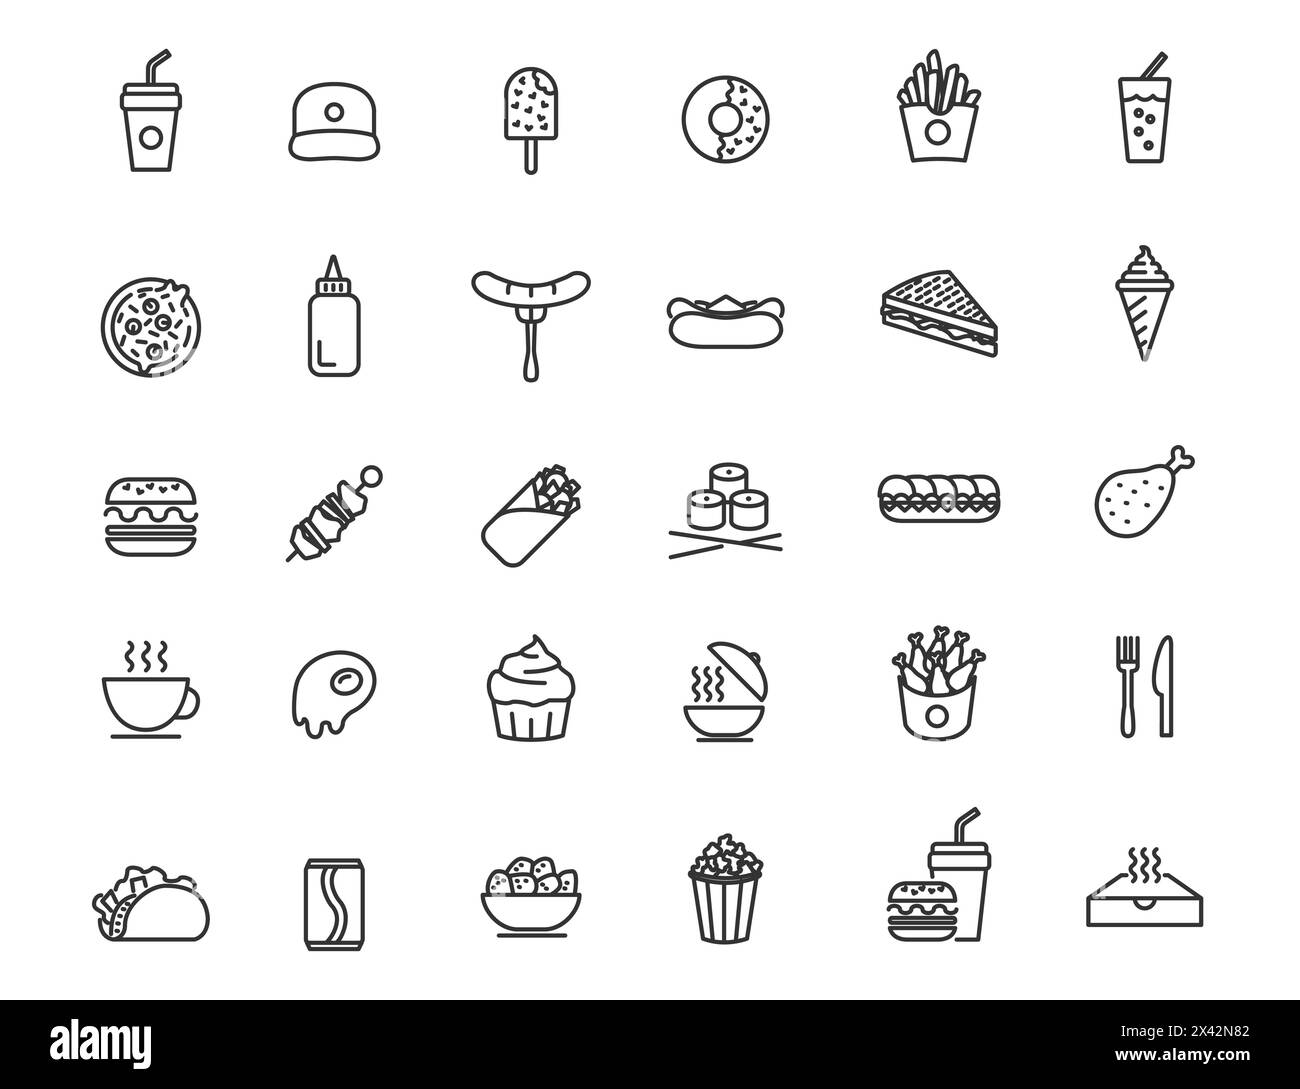 Set of linear fast food icons. Food and drink icons in simple design. Vector illustration Stock Vector